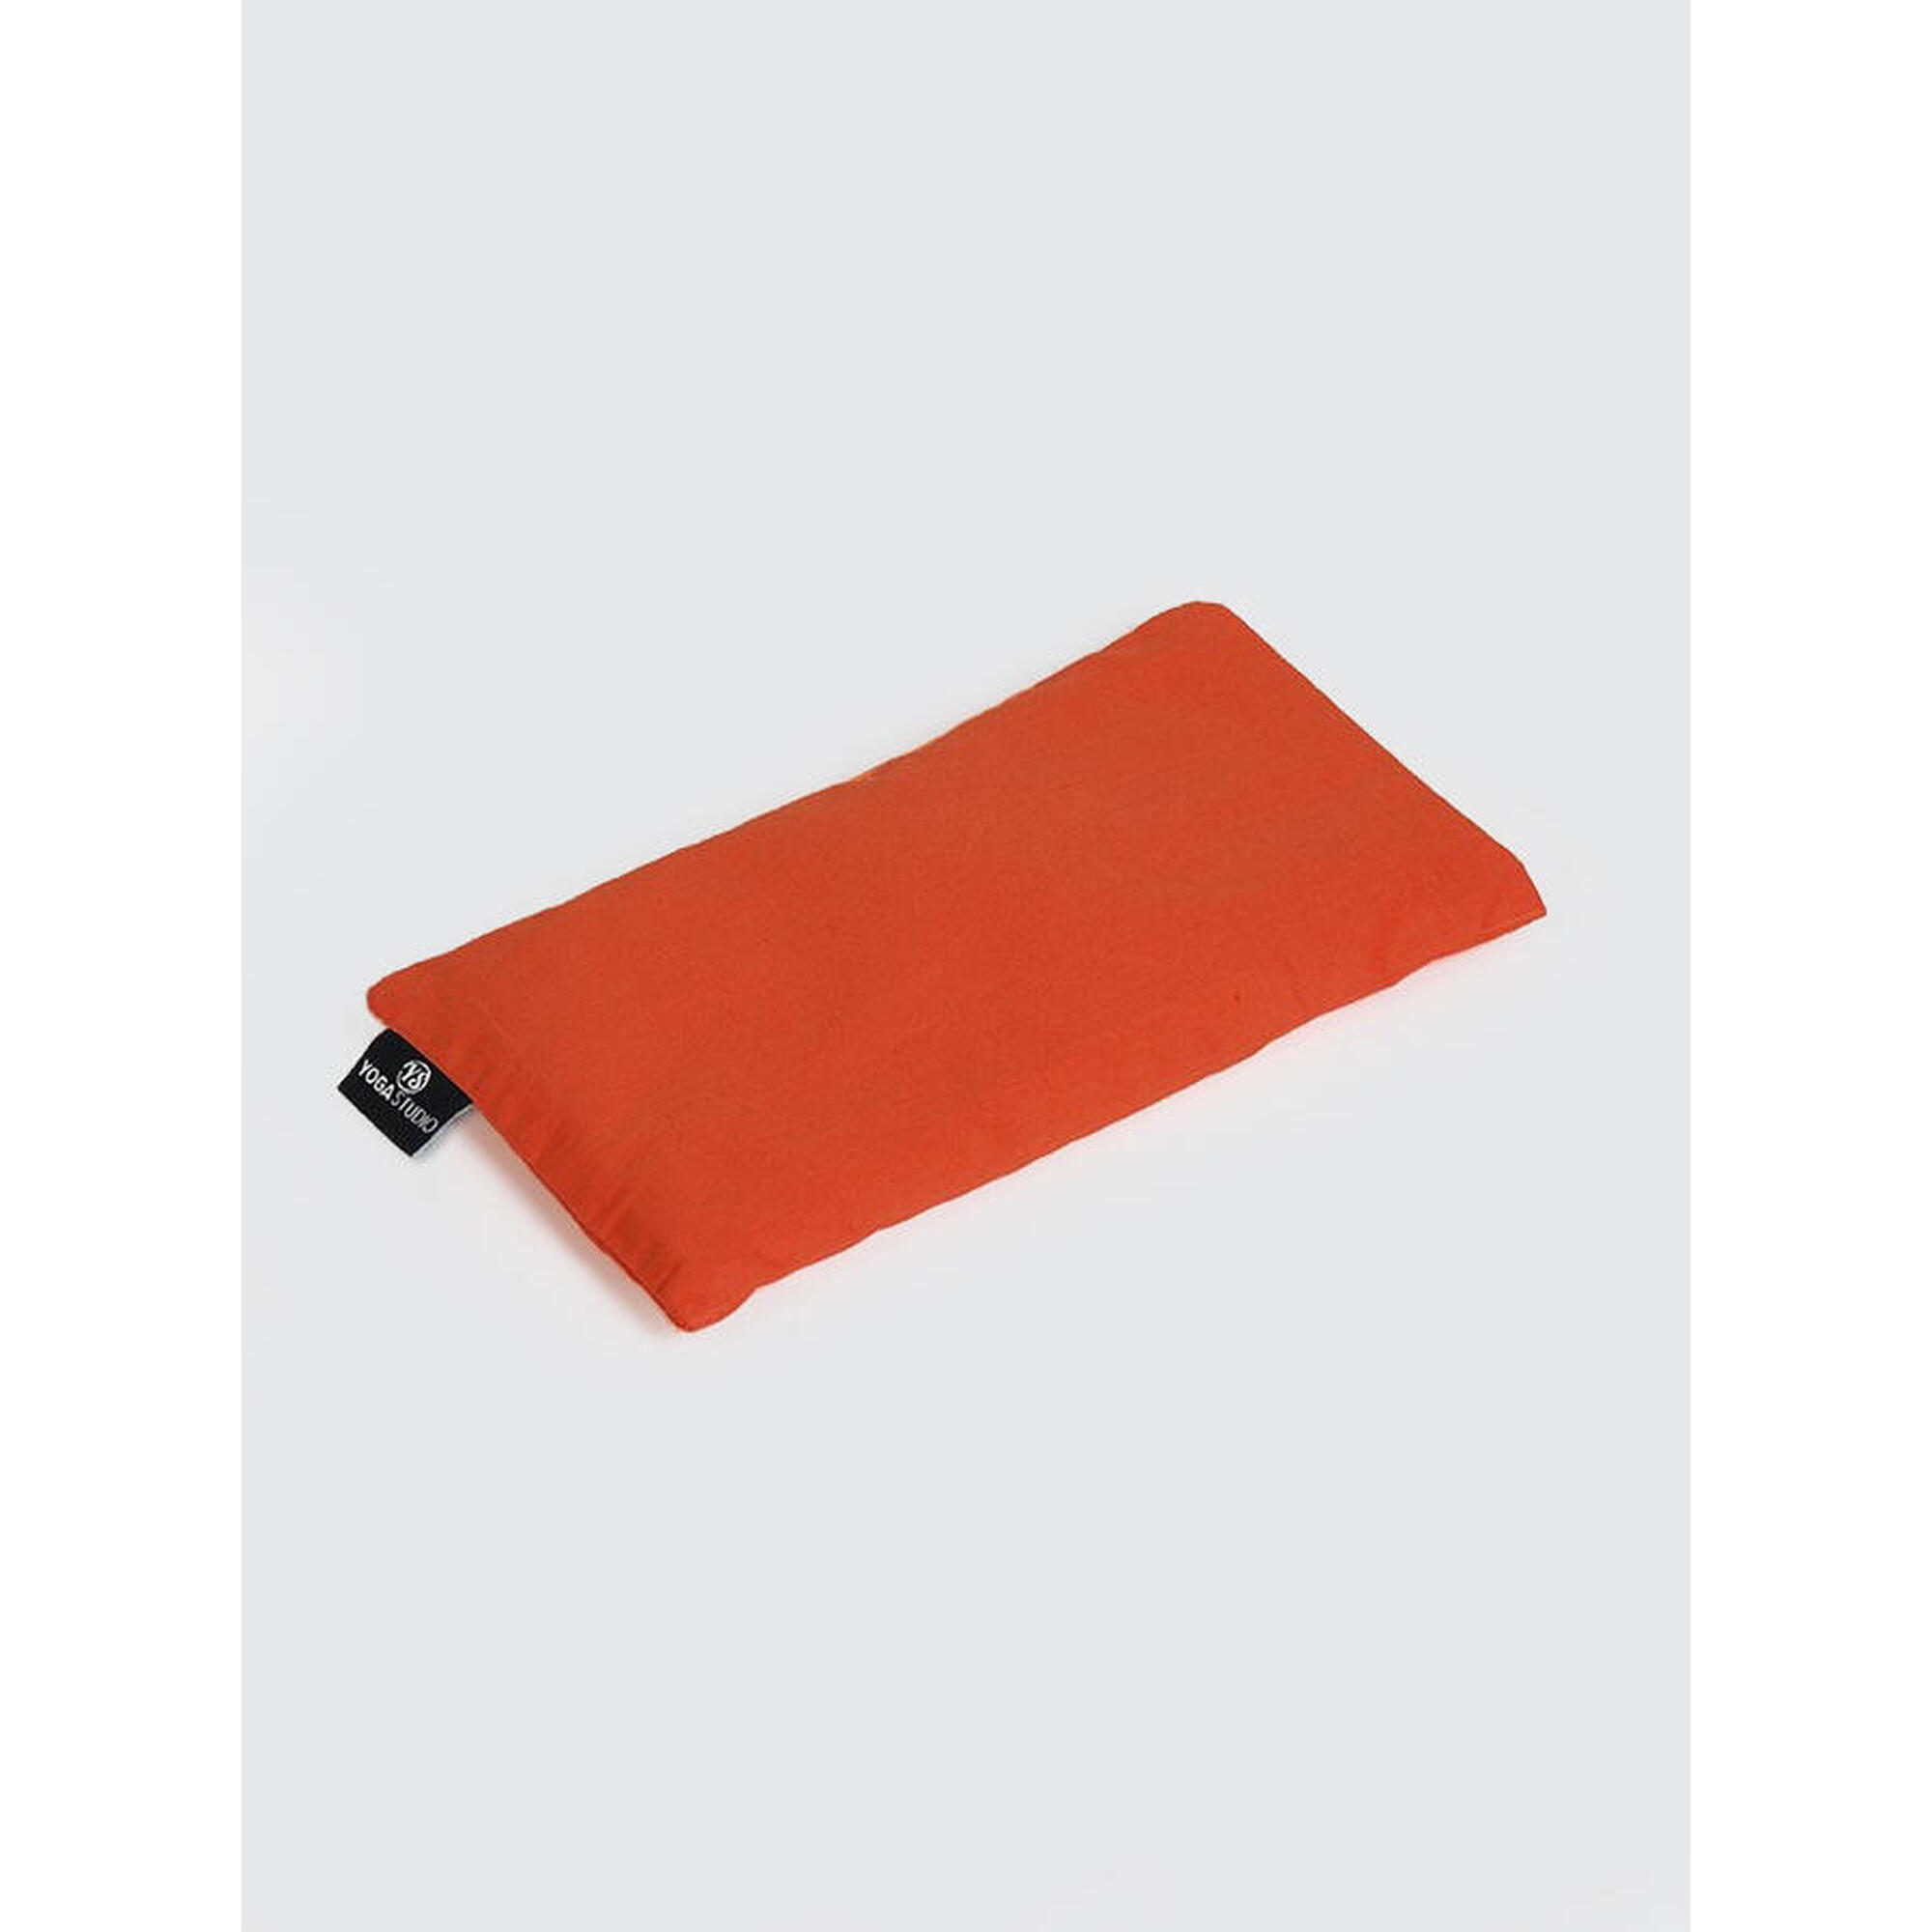 Yoga Studio Scented Lavender & Linseed Eye Pillows - Terracotta 1/2